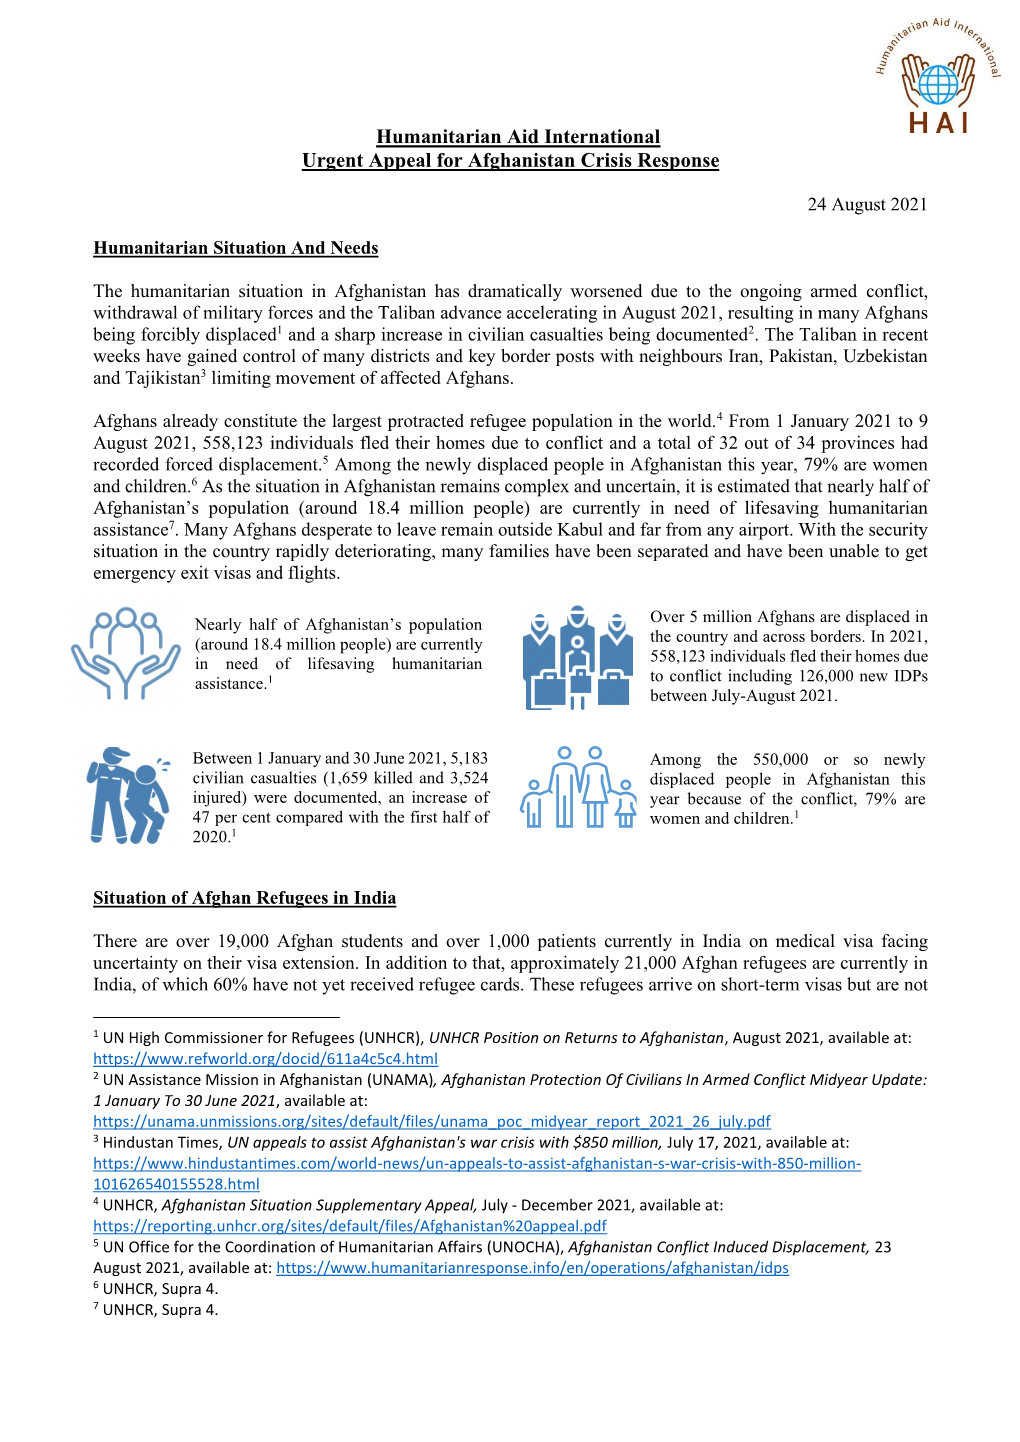 Humanitarian Aid International Urgent Appeal for Afghanistan Crisis Response